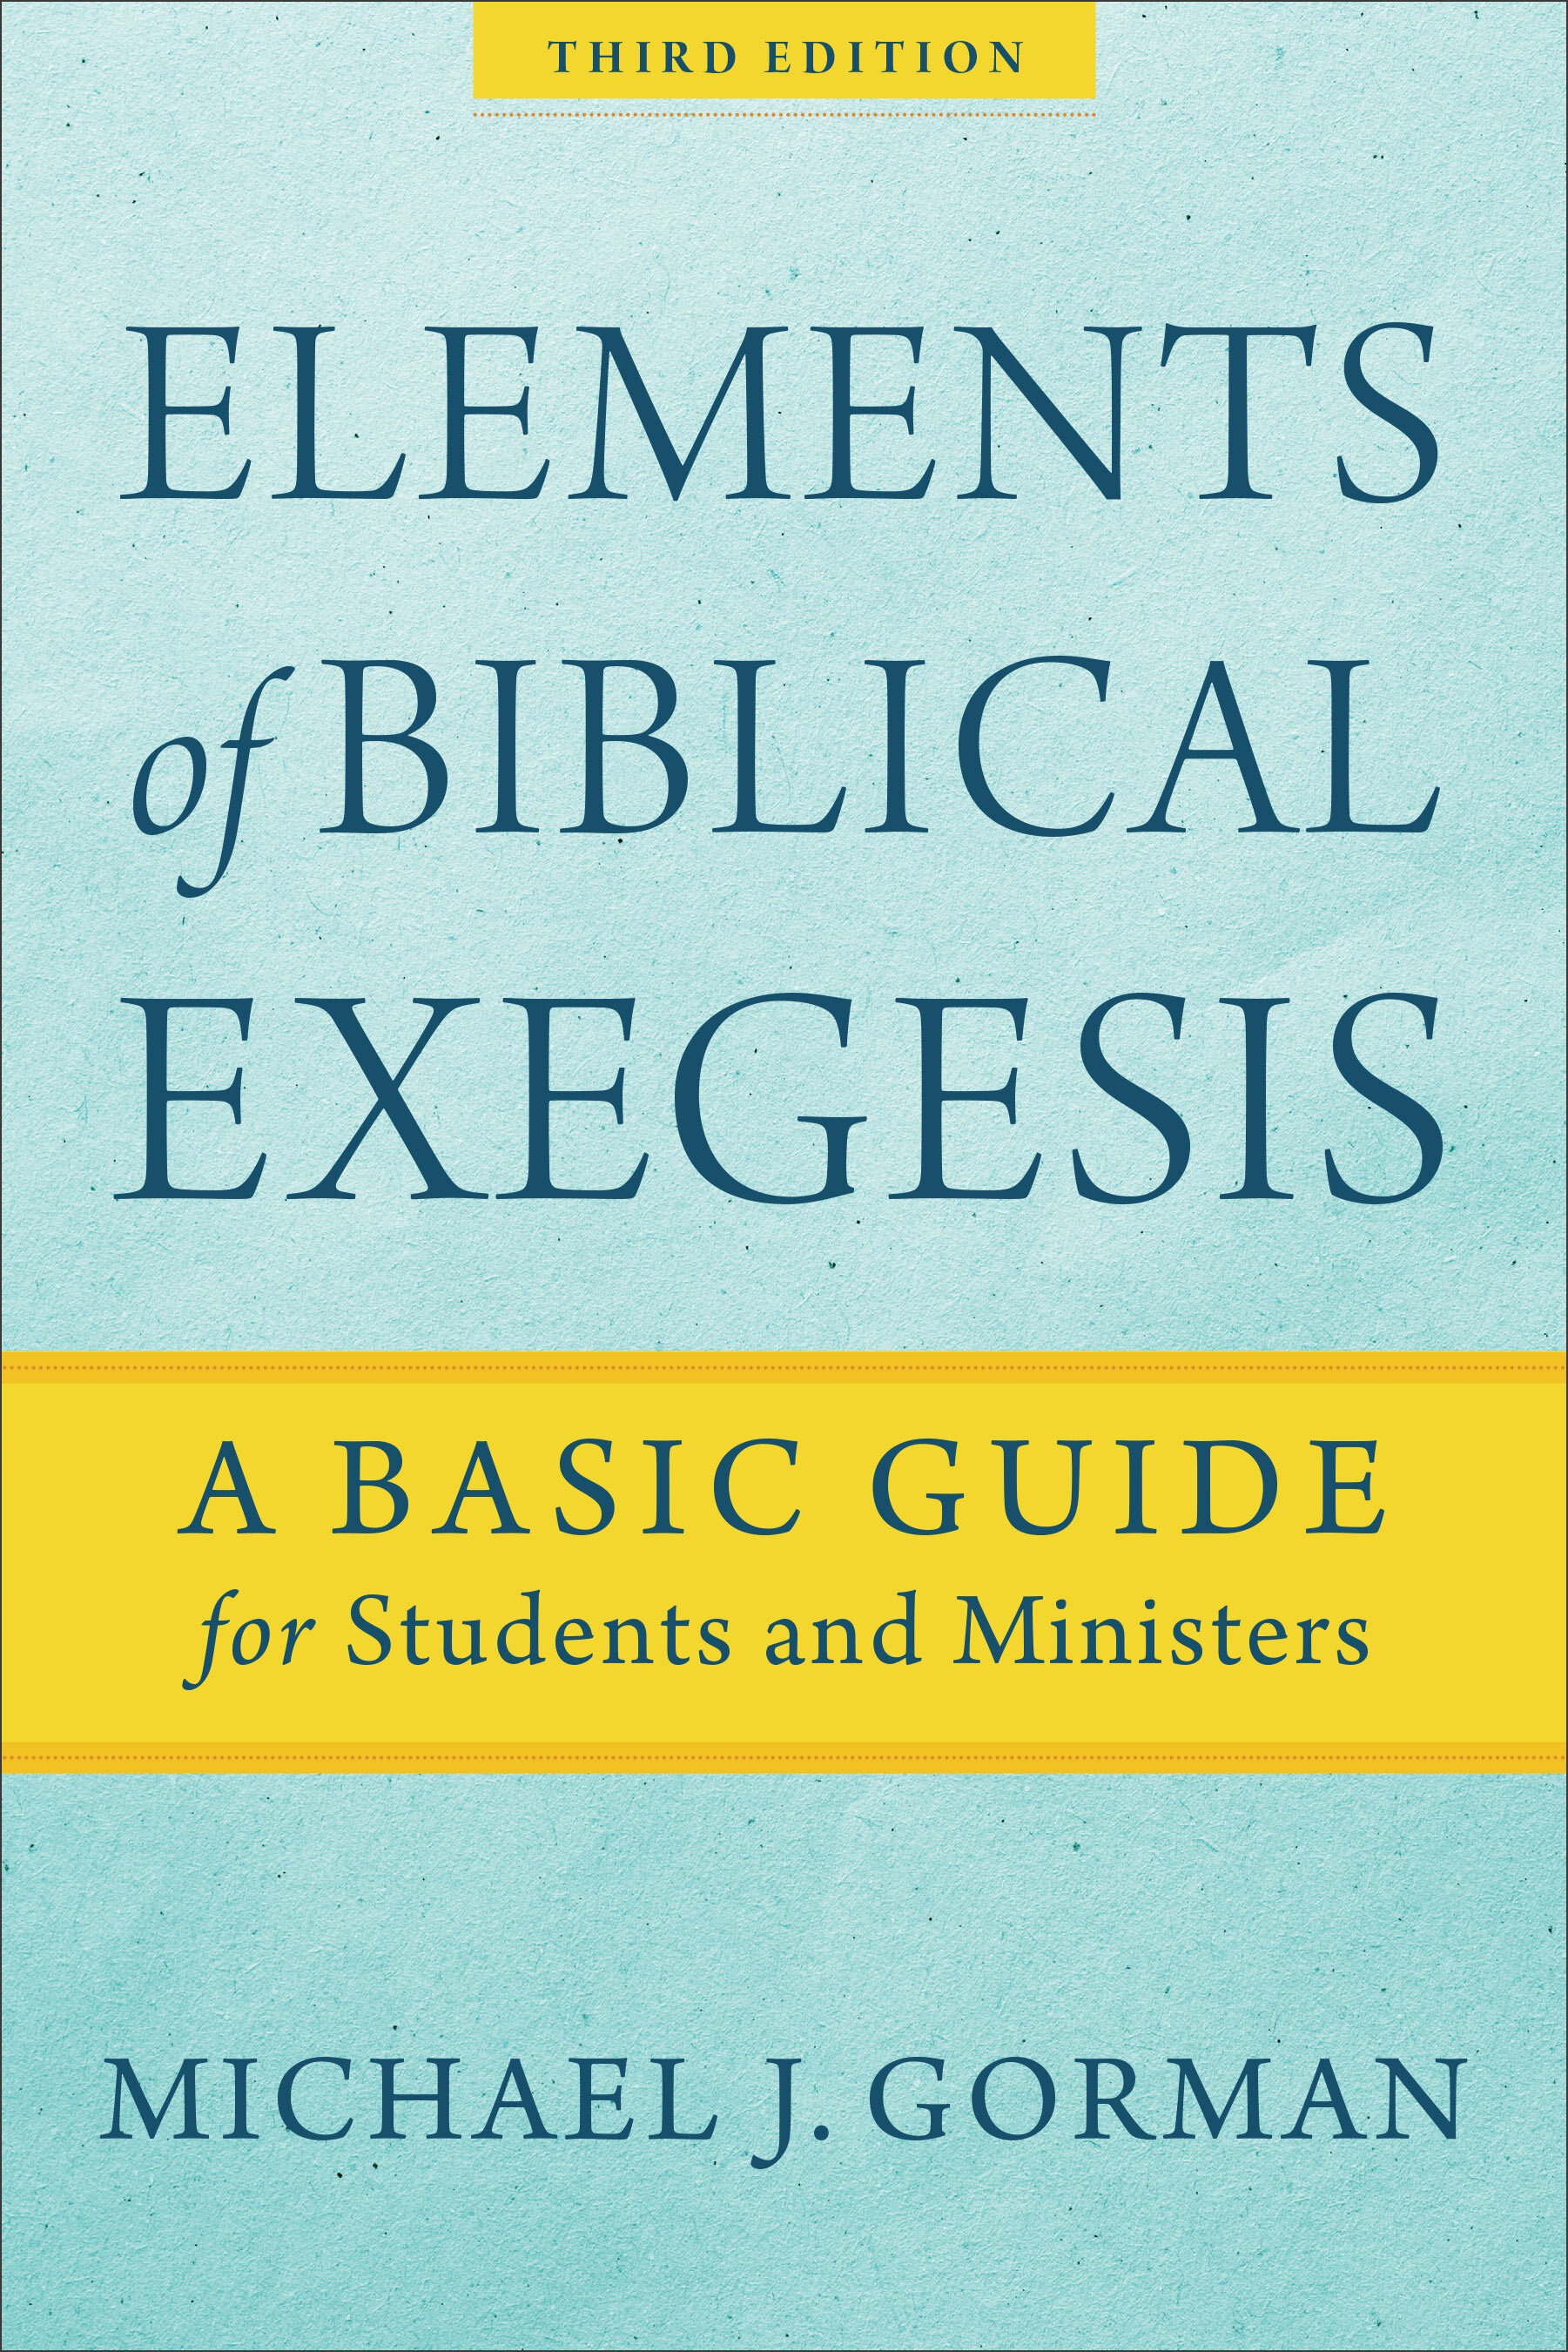 Elements of Biblical Exegesis: A Basic Guide for Students and Ministers, 3rd ed.